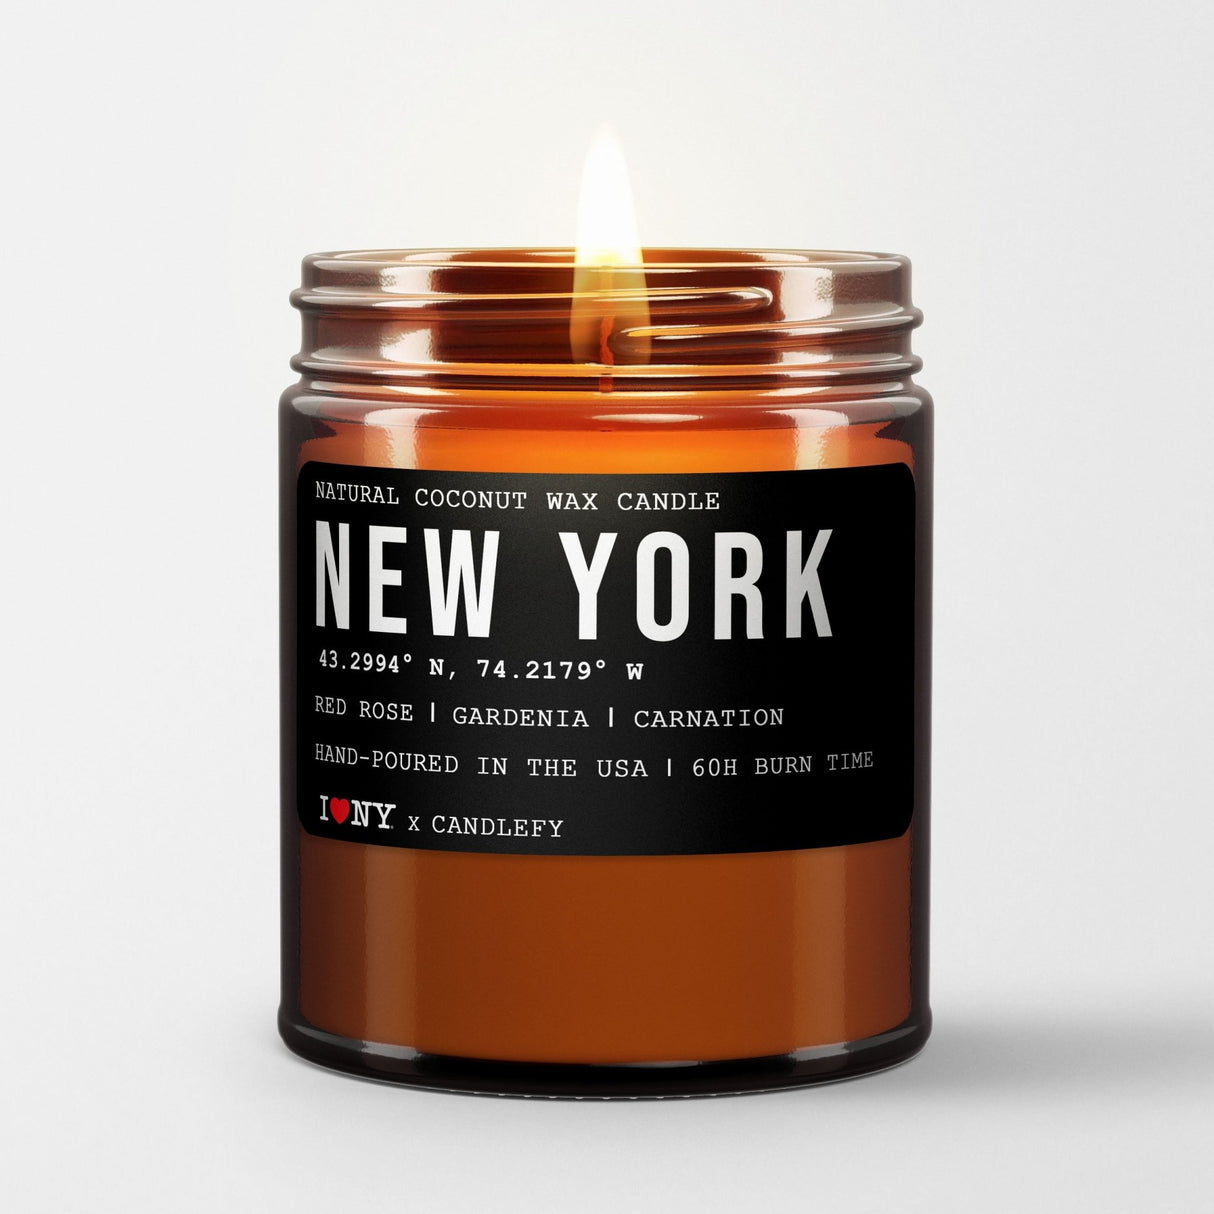 New York Scented Candle (Rose, Gardenia, Carnation) - Candlefy